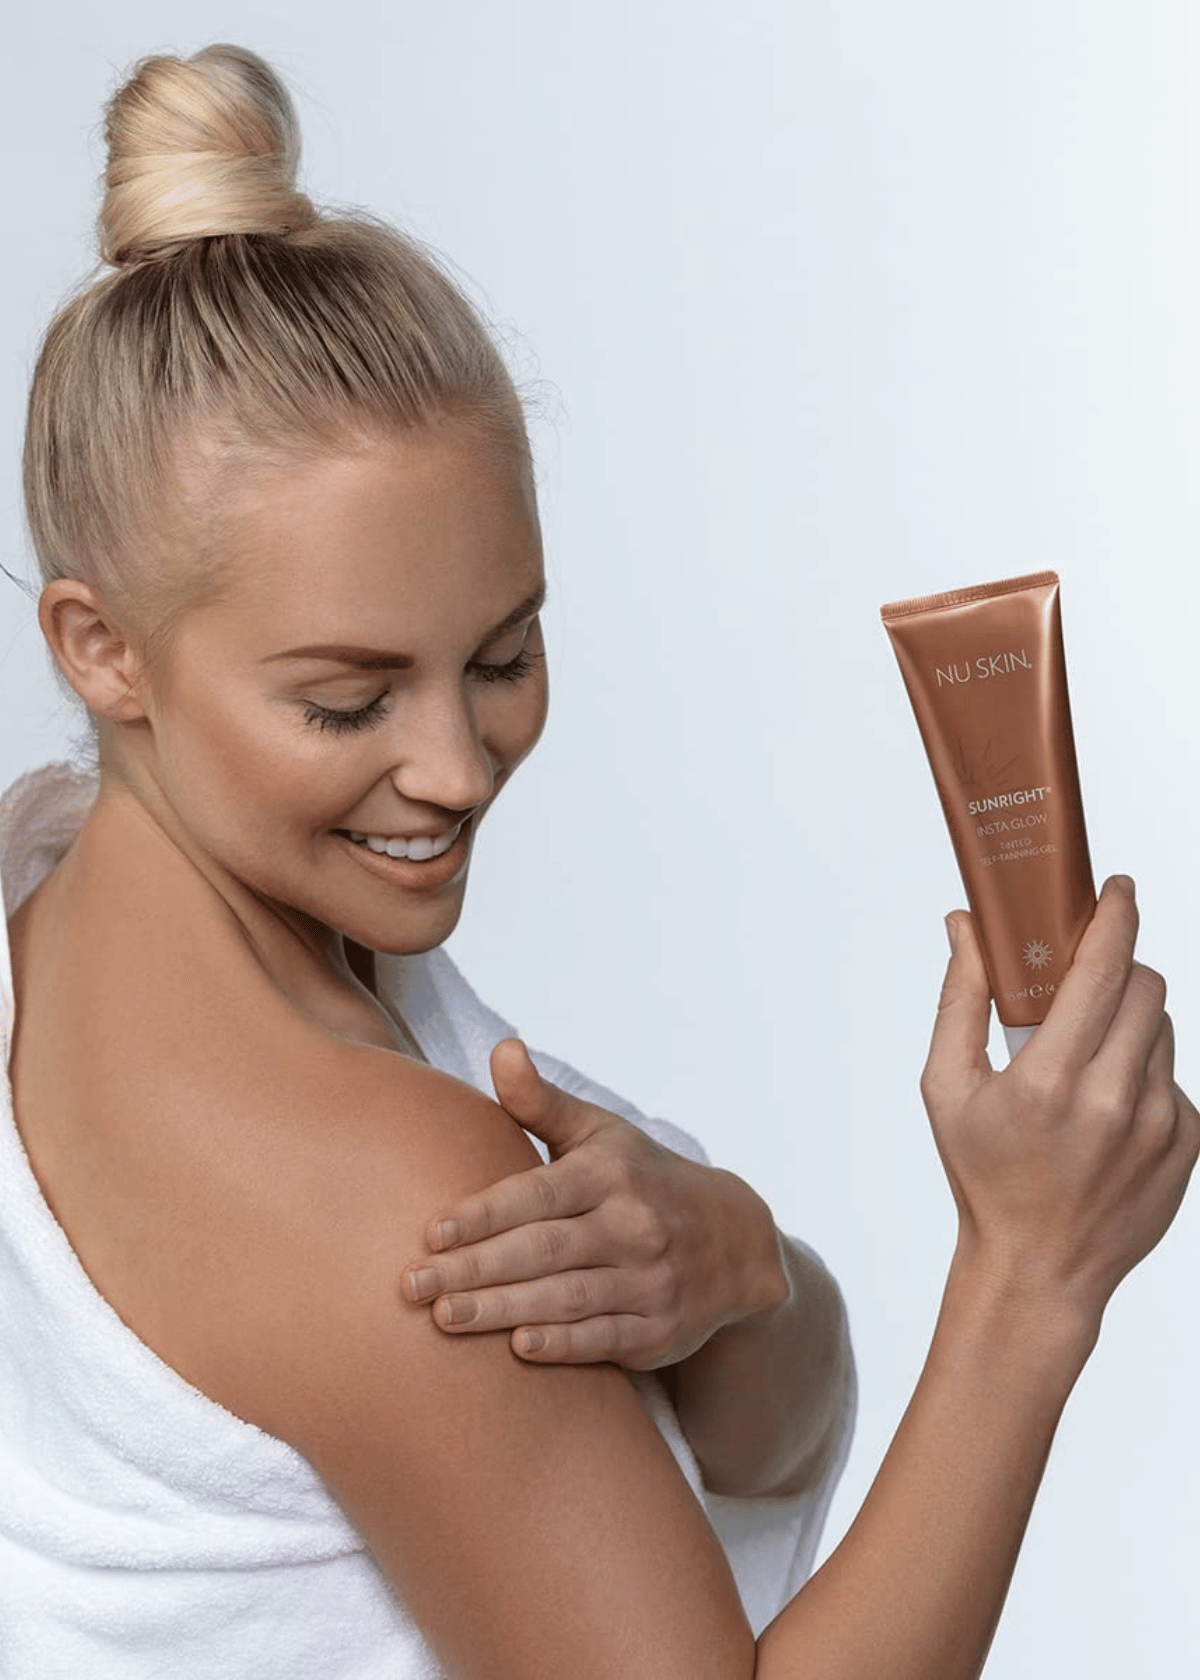 Say Goodbye to Streaks and Odor with Nu Skin Tanning Gel